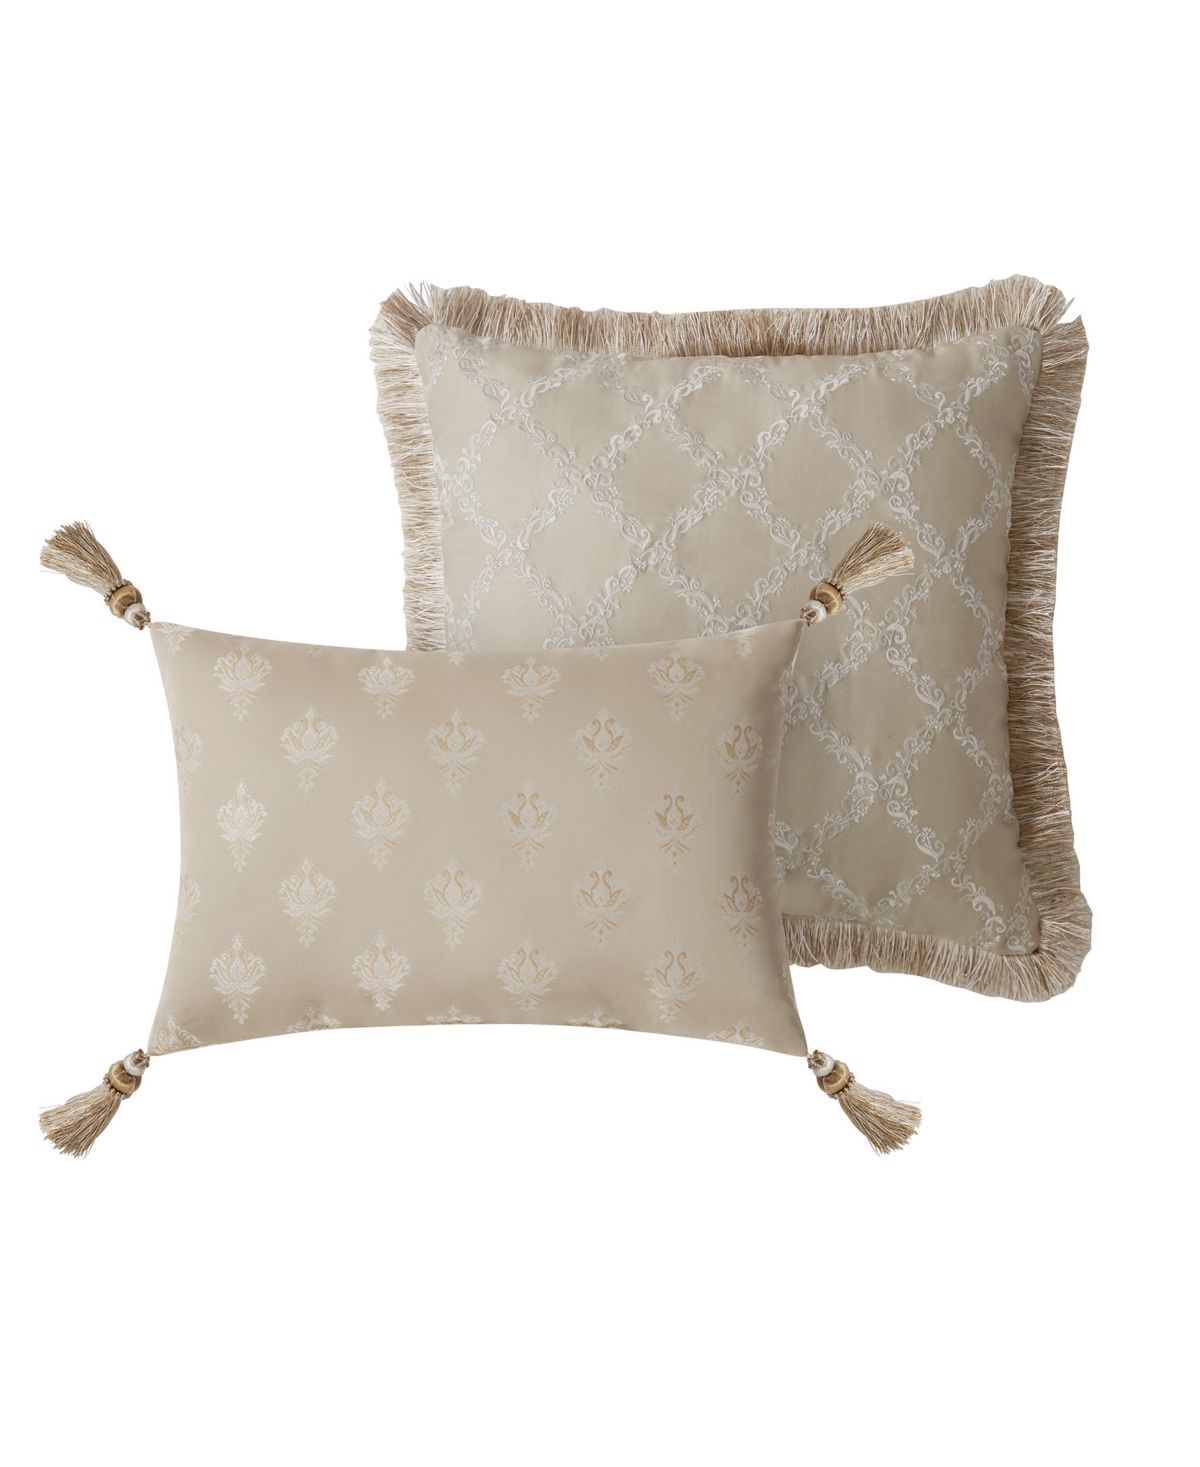 WATERFORD ANNALISE DECORATIVE PILLOWS SET OF 2